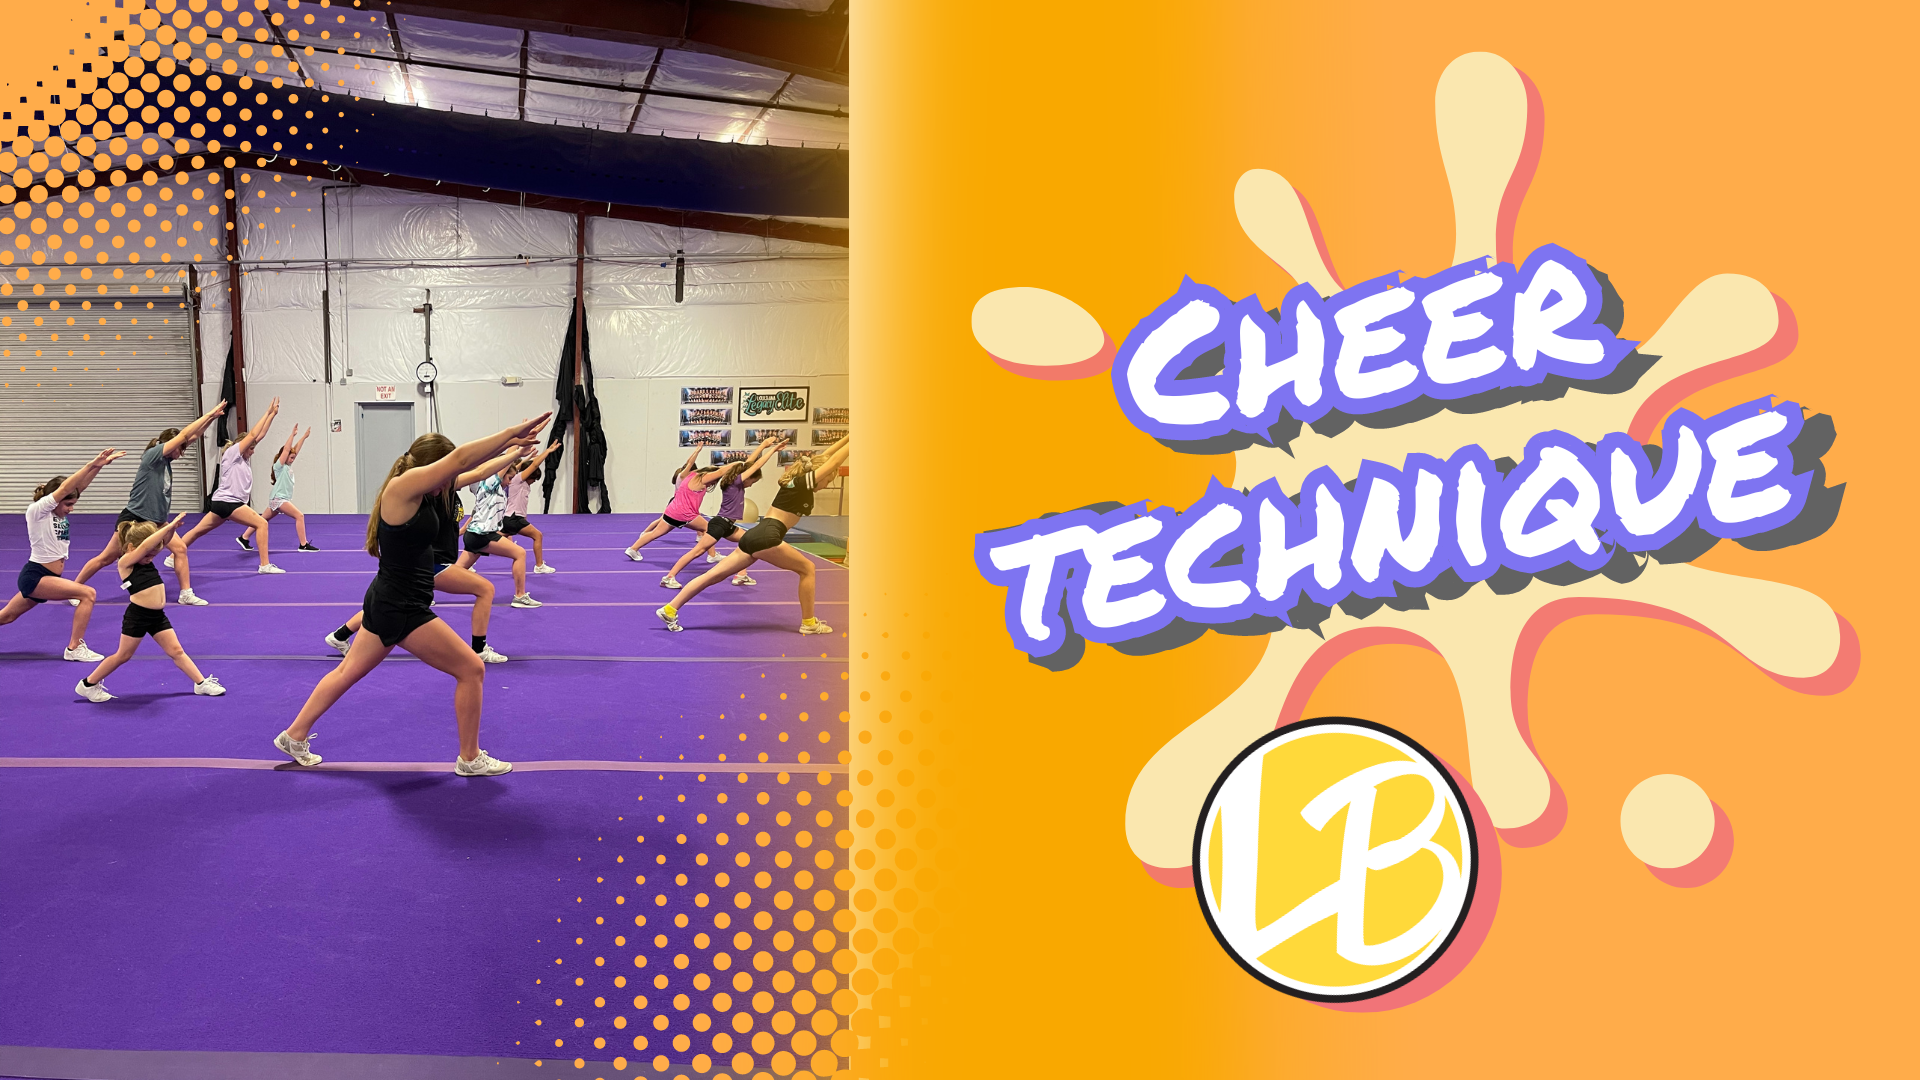 A group of cheerleaders practices in a purple-floored gym, performing a stretching routine. The right side of the image features a vibrant orange background with the text "Cheer Technique" and a yellow and black logo.